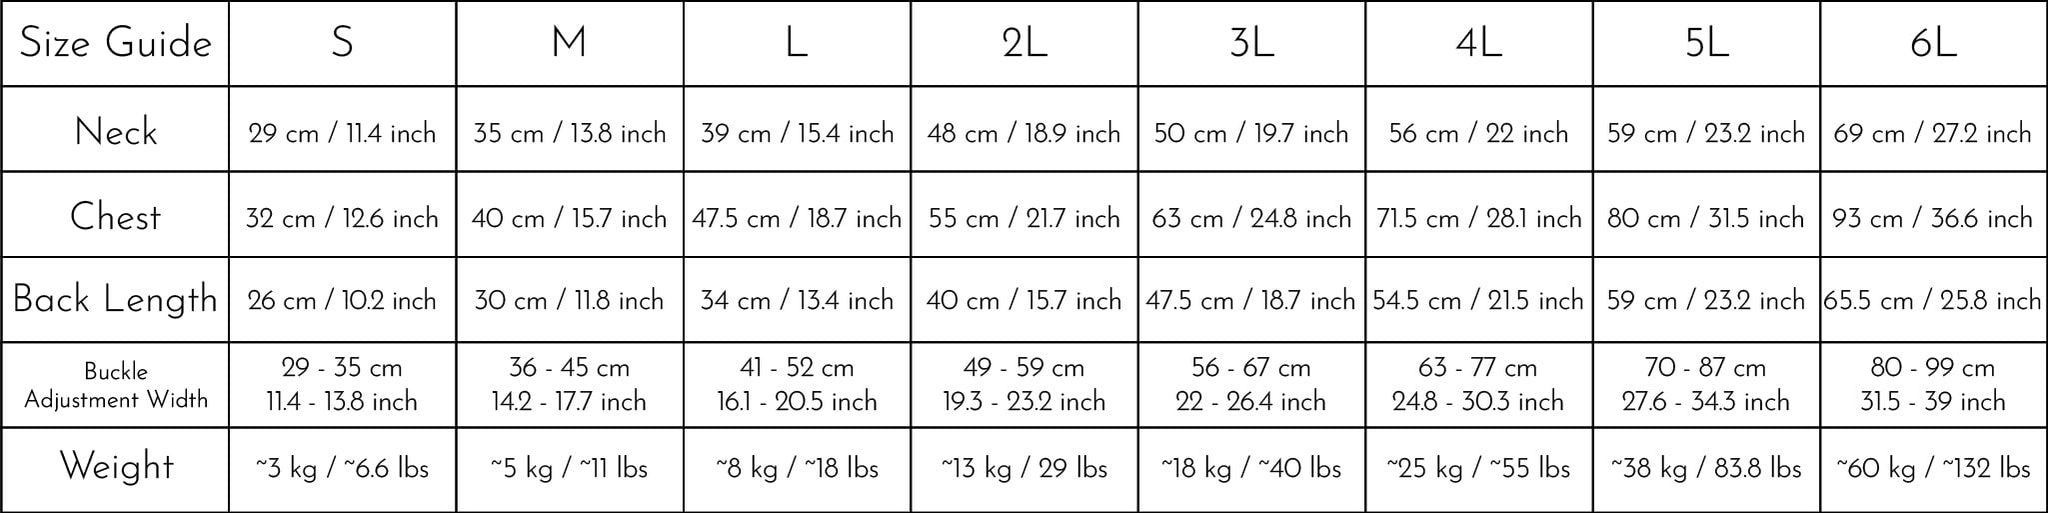 Size chart for lake louise teppe padding.